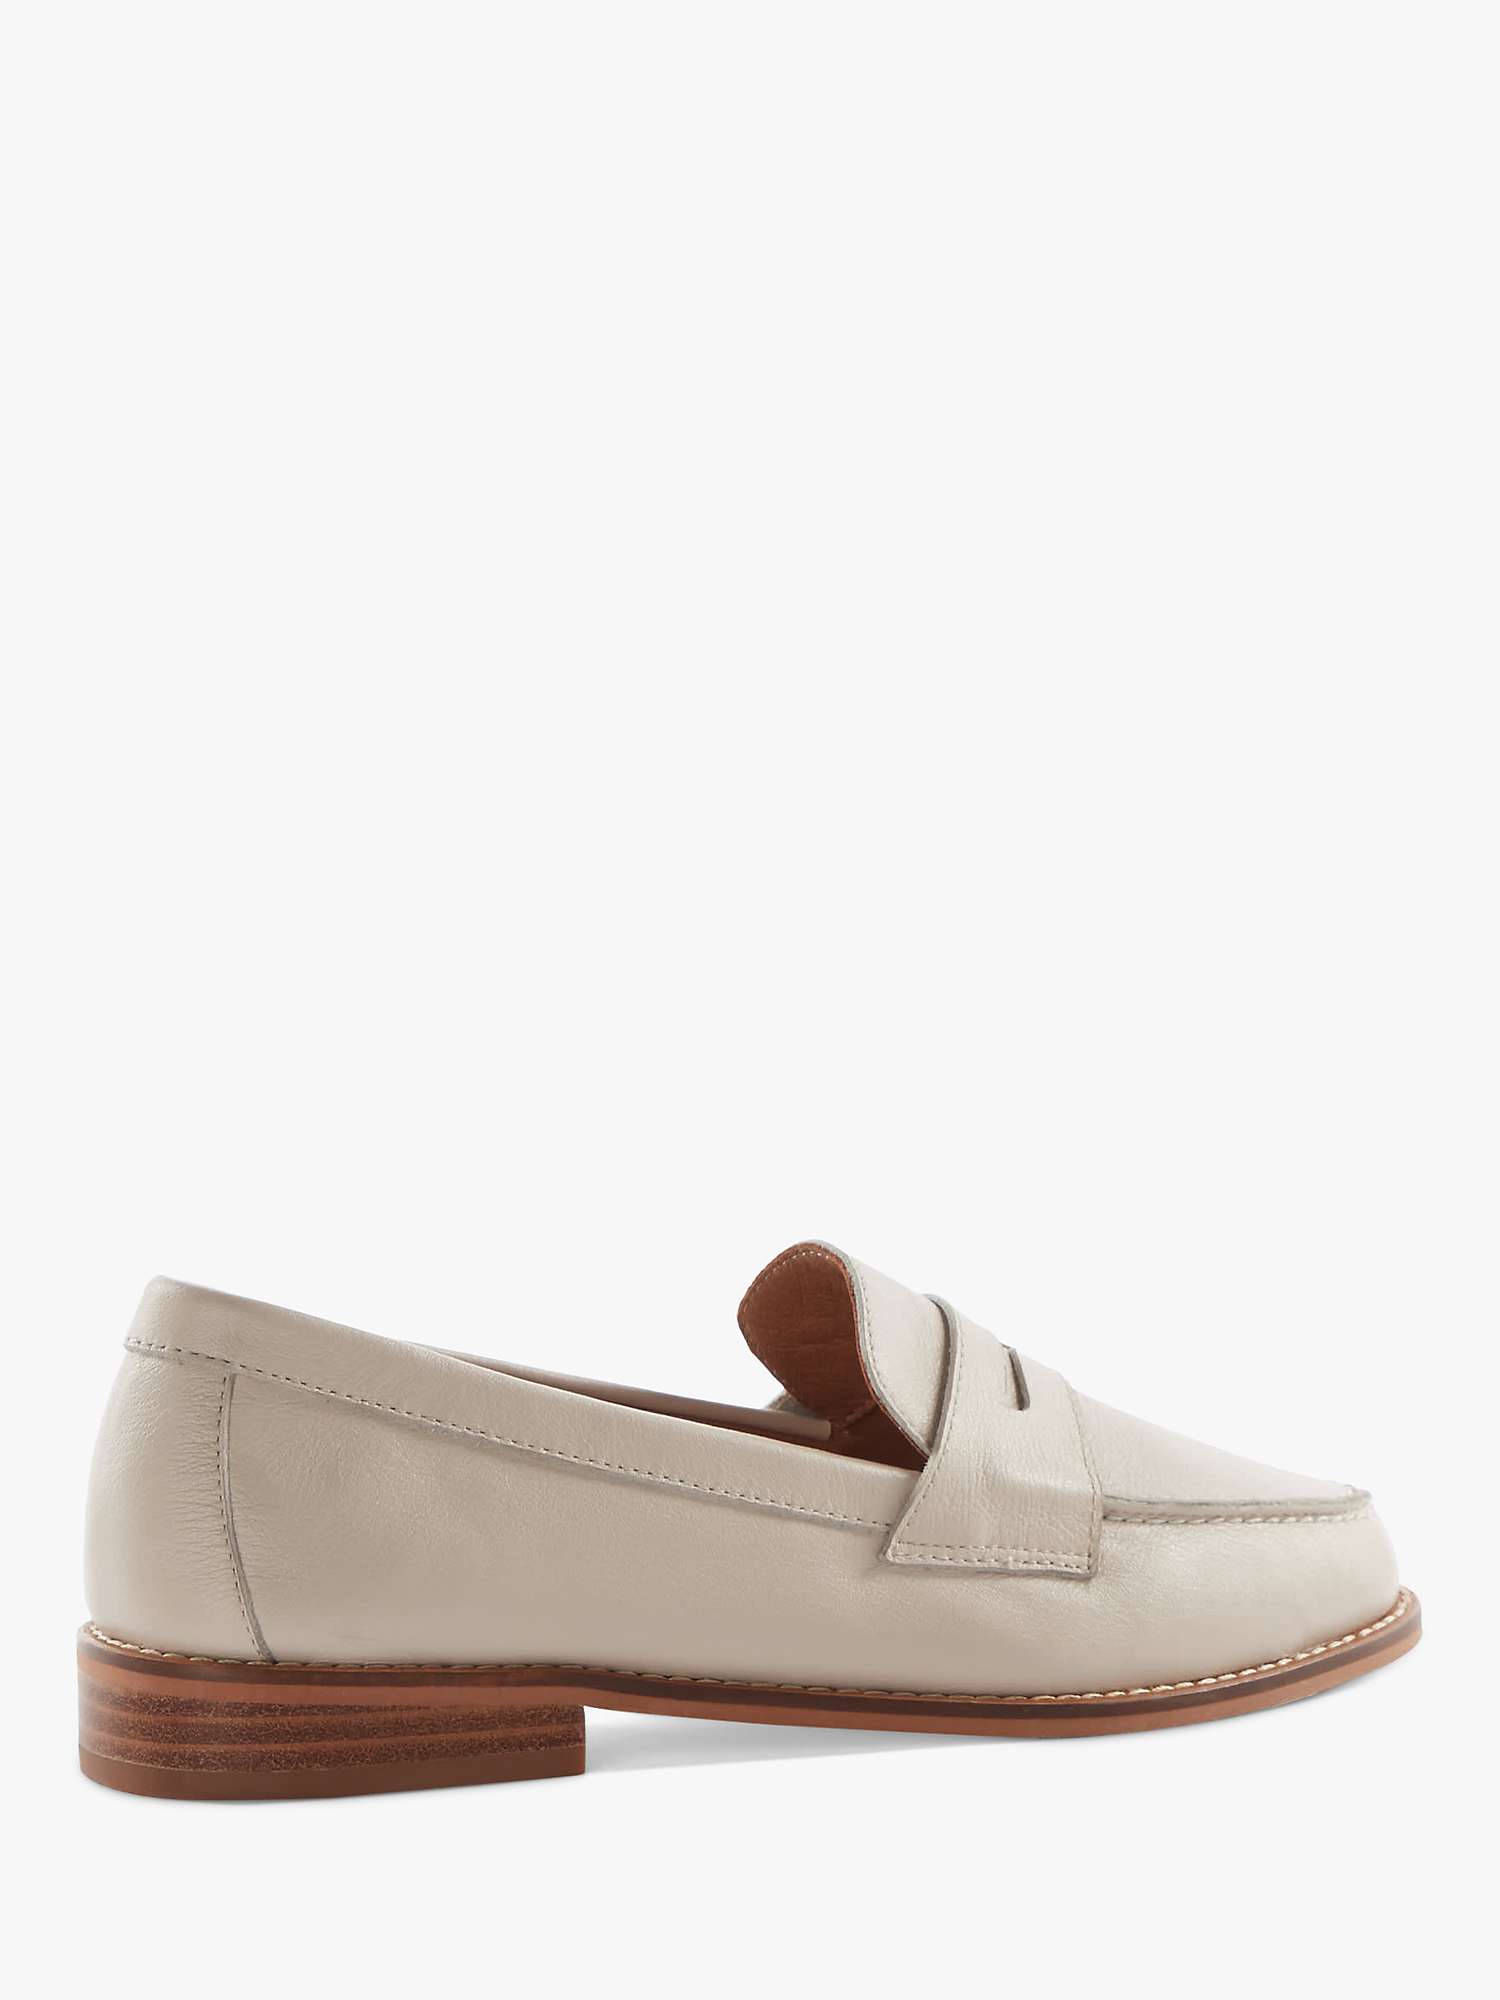 Buy Dune Ginelli Leather Penny Loafers, Ecru Online at johnlewis.com